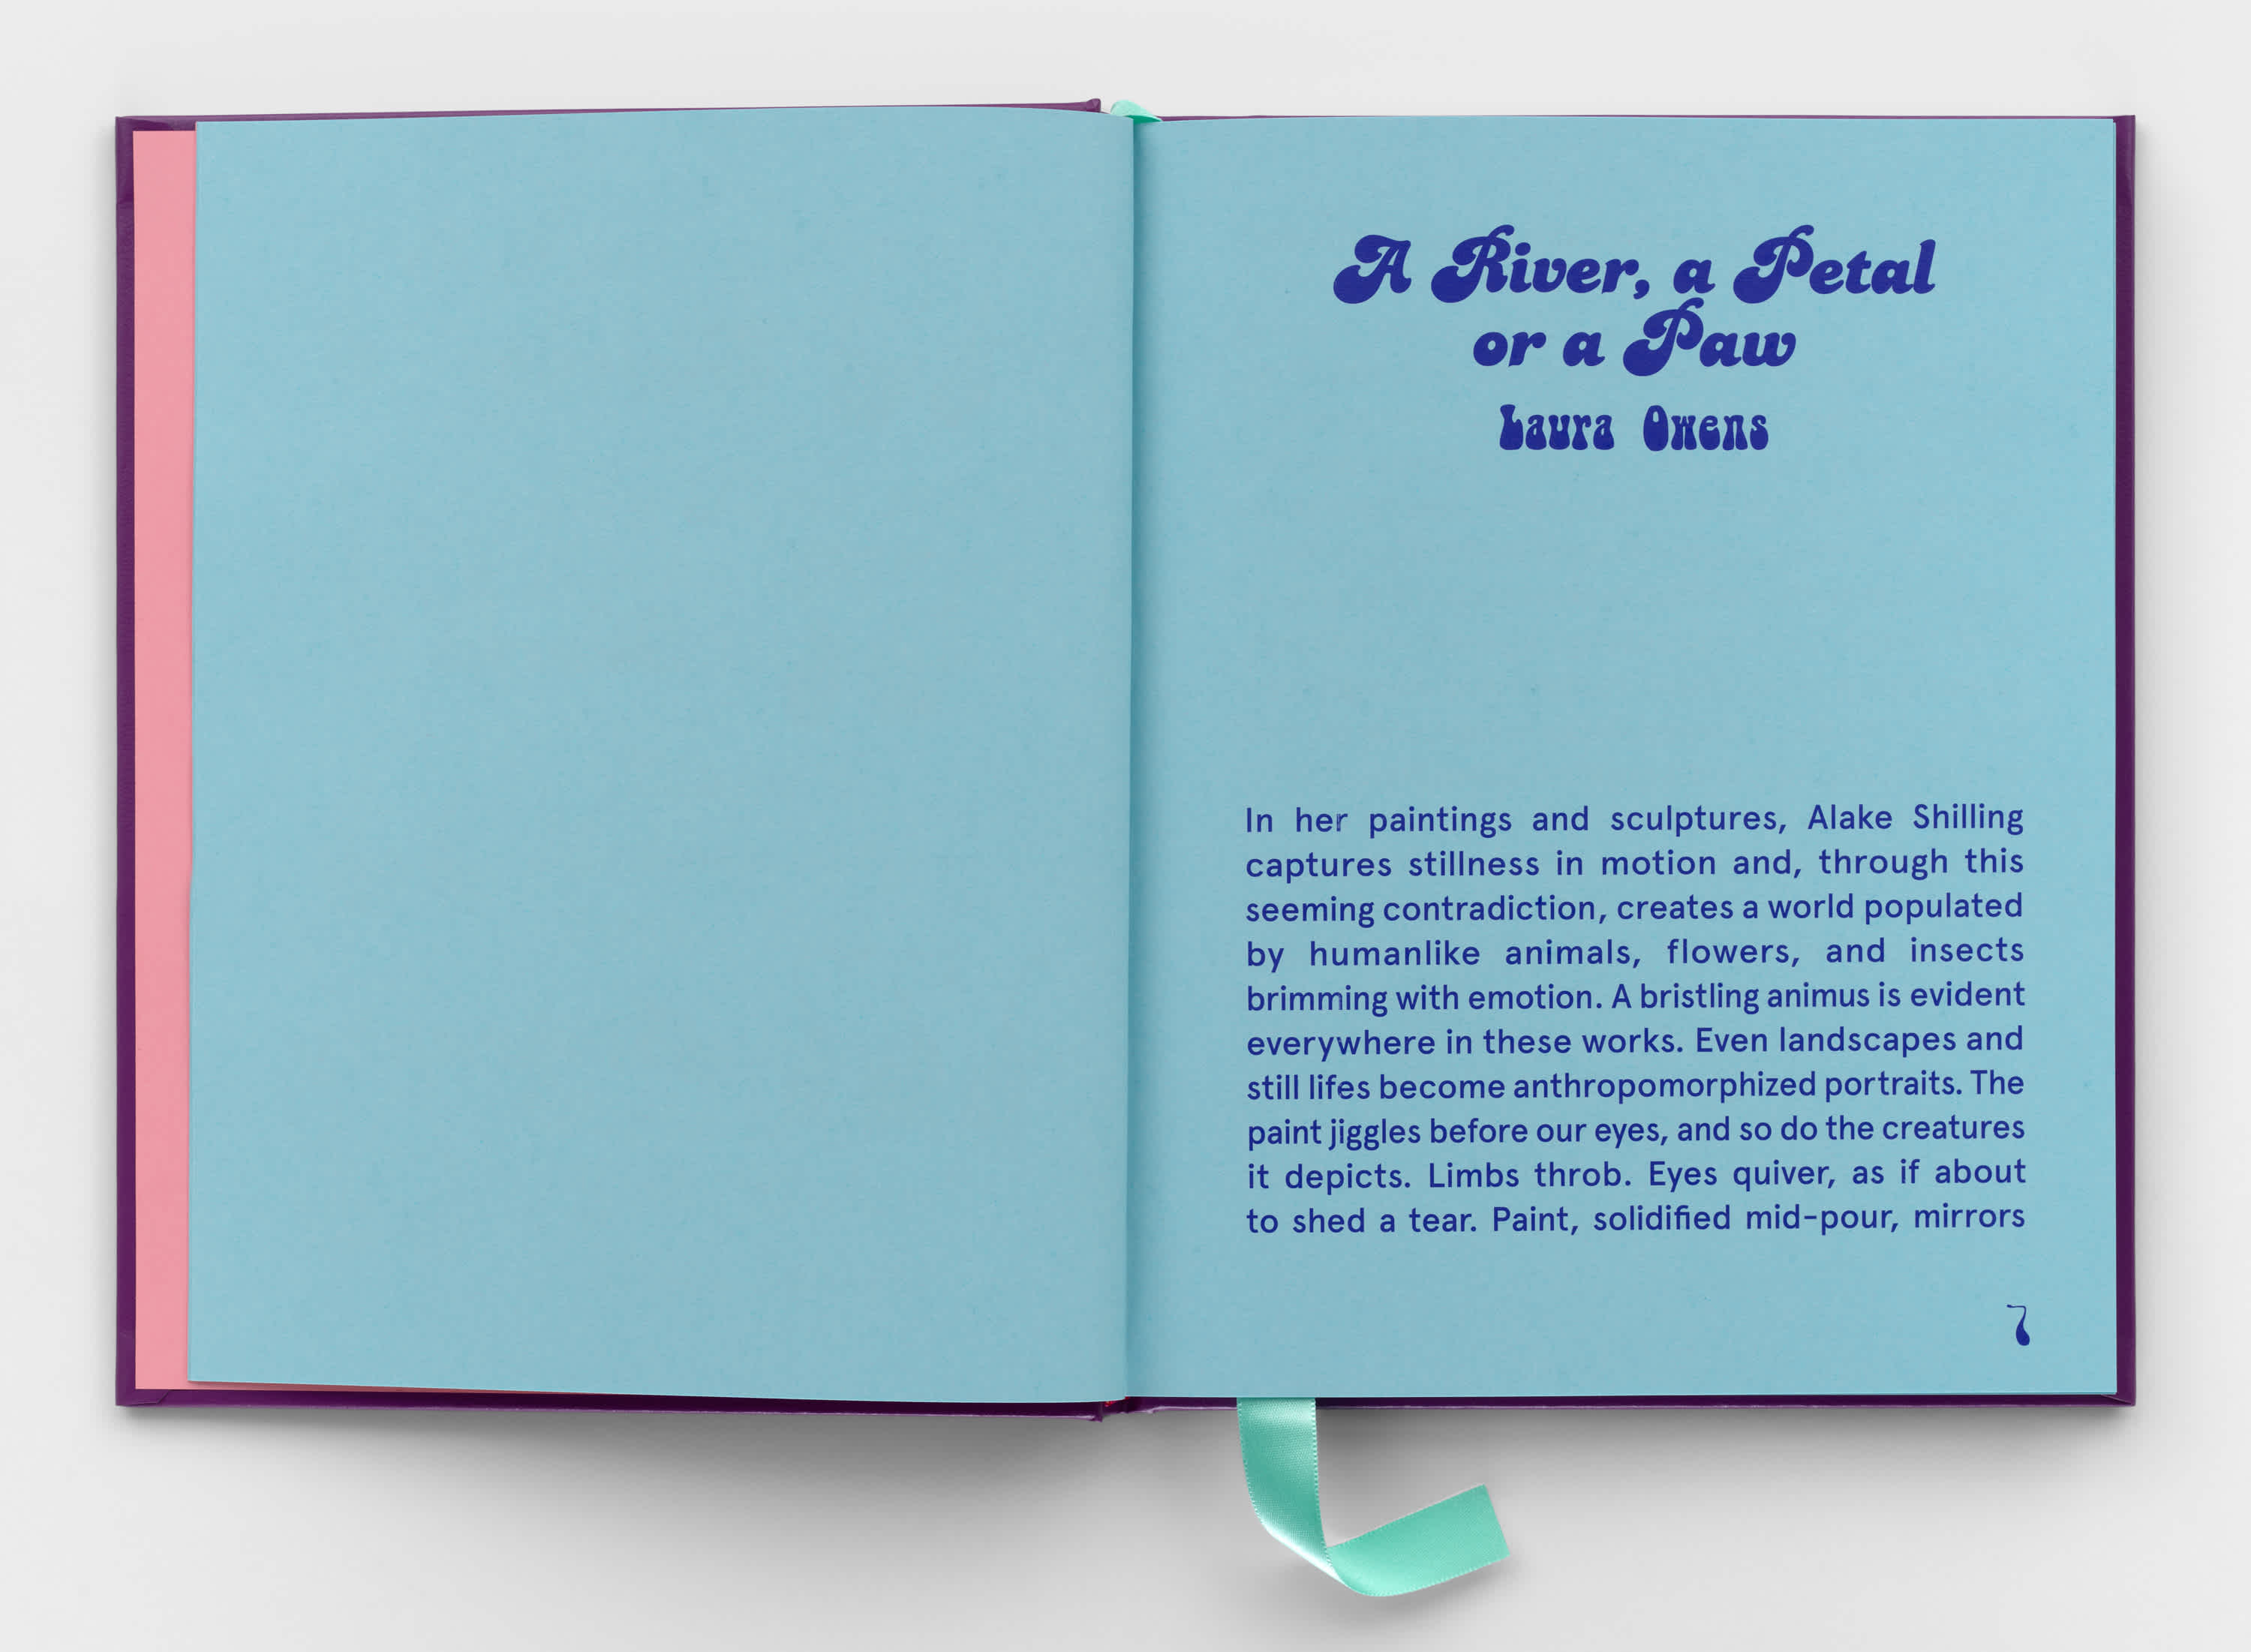 An open book with light blue pages and dark blue text. A turquoise ribbon sticks out of the bottom of the book, near the binding.